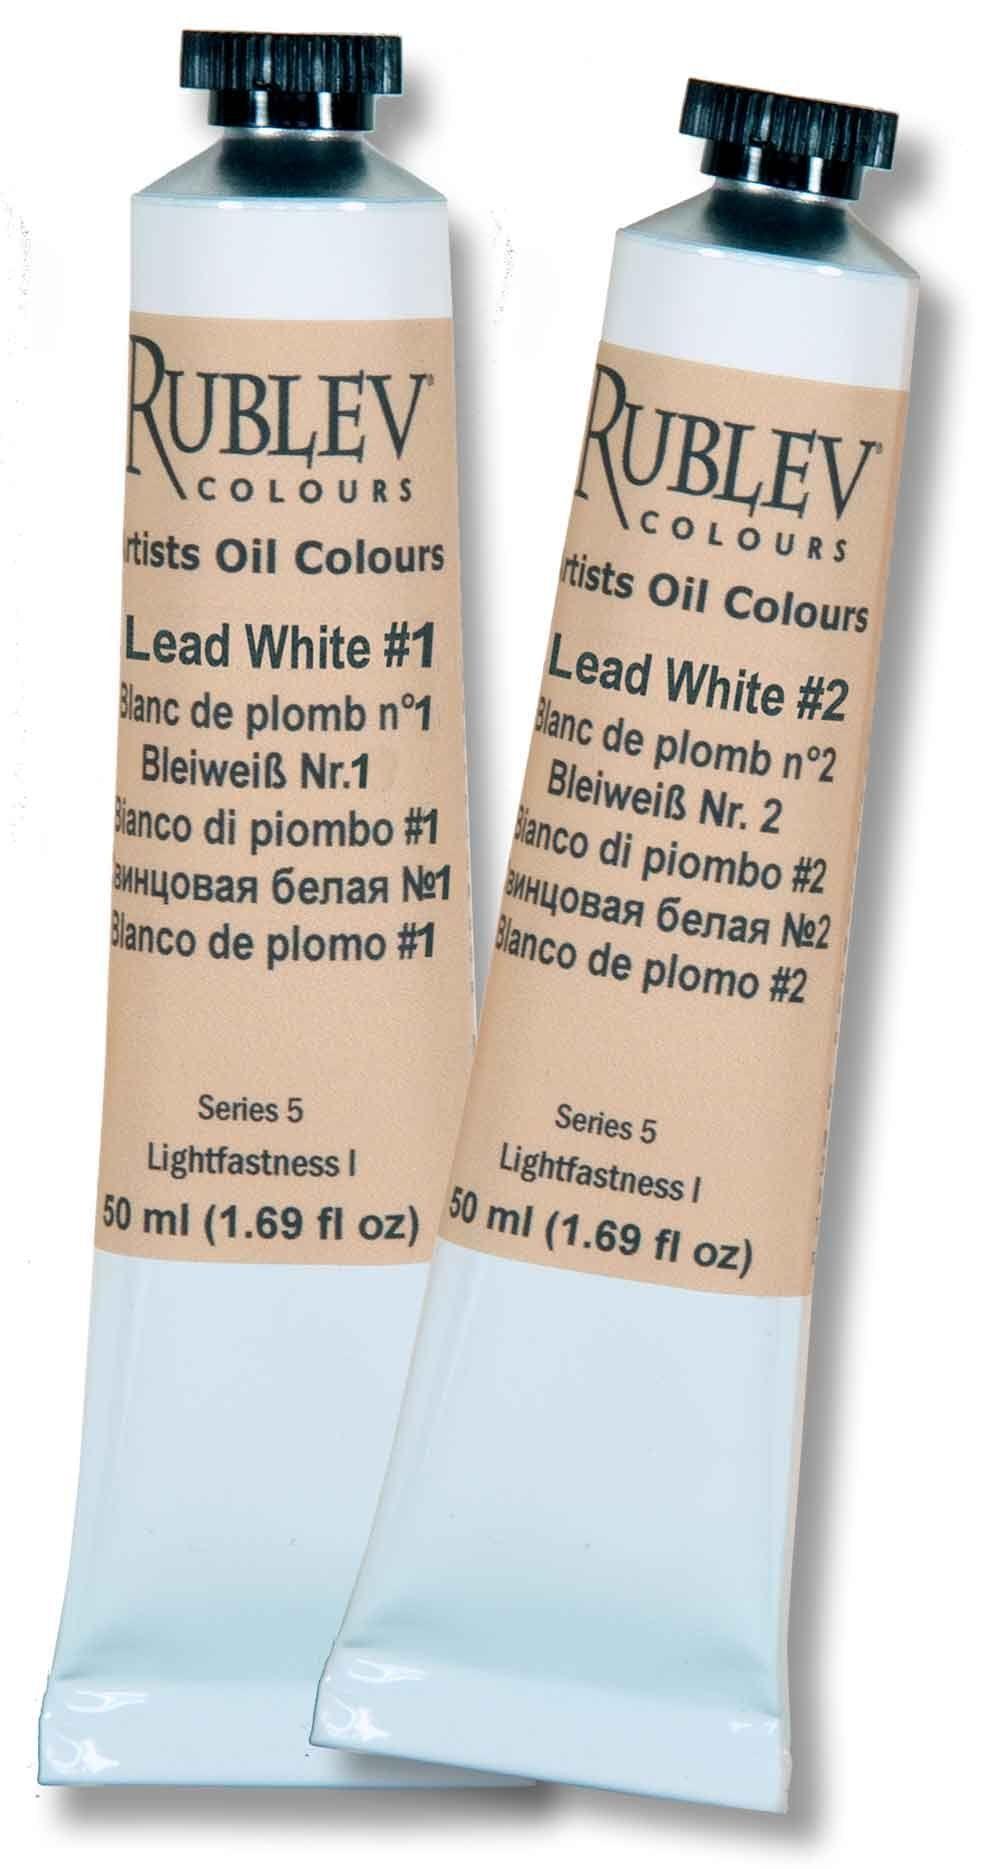 Rublev Colours Lead White and Verona Green Earth Artist Oils 50ml tubes